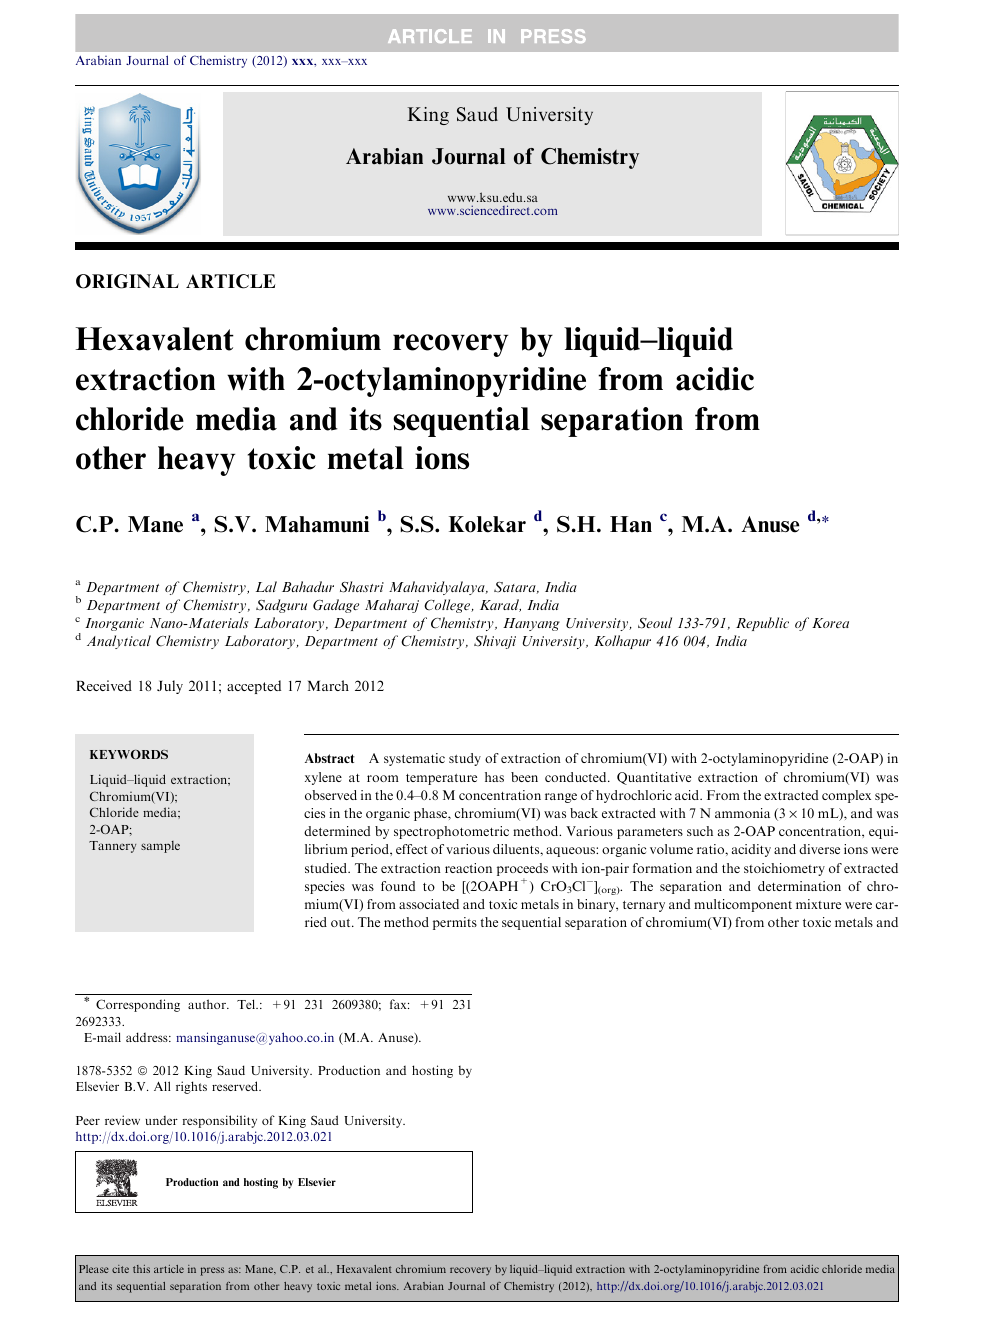 Hexavalent Chromium Recovery By Liquid Liquid Extraction With 2 Octylaminopyridine From Acidic Chloride Media And Its Sequential Separation From Other Heavy Toxic Metal Ions Topic Of Research Paper In Chemical Sciences Download Scholarly